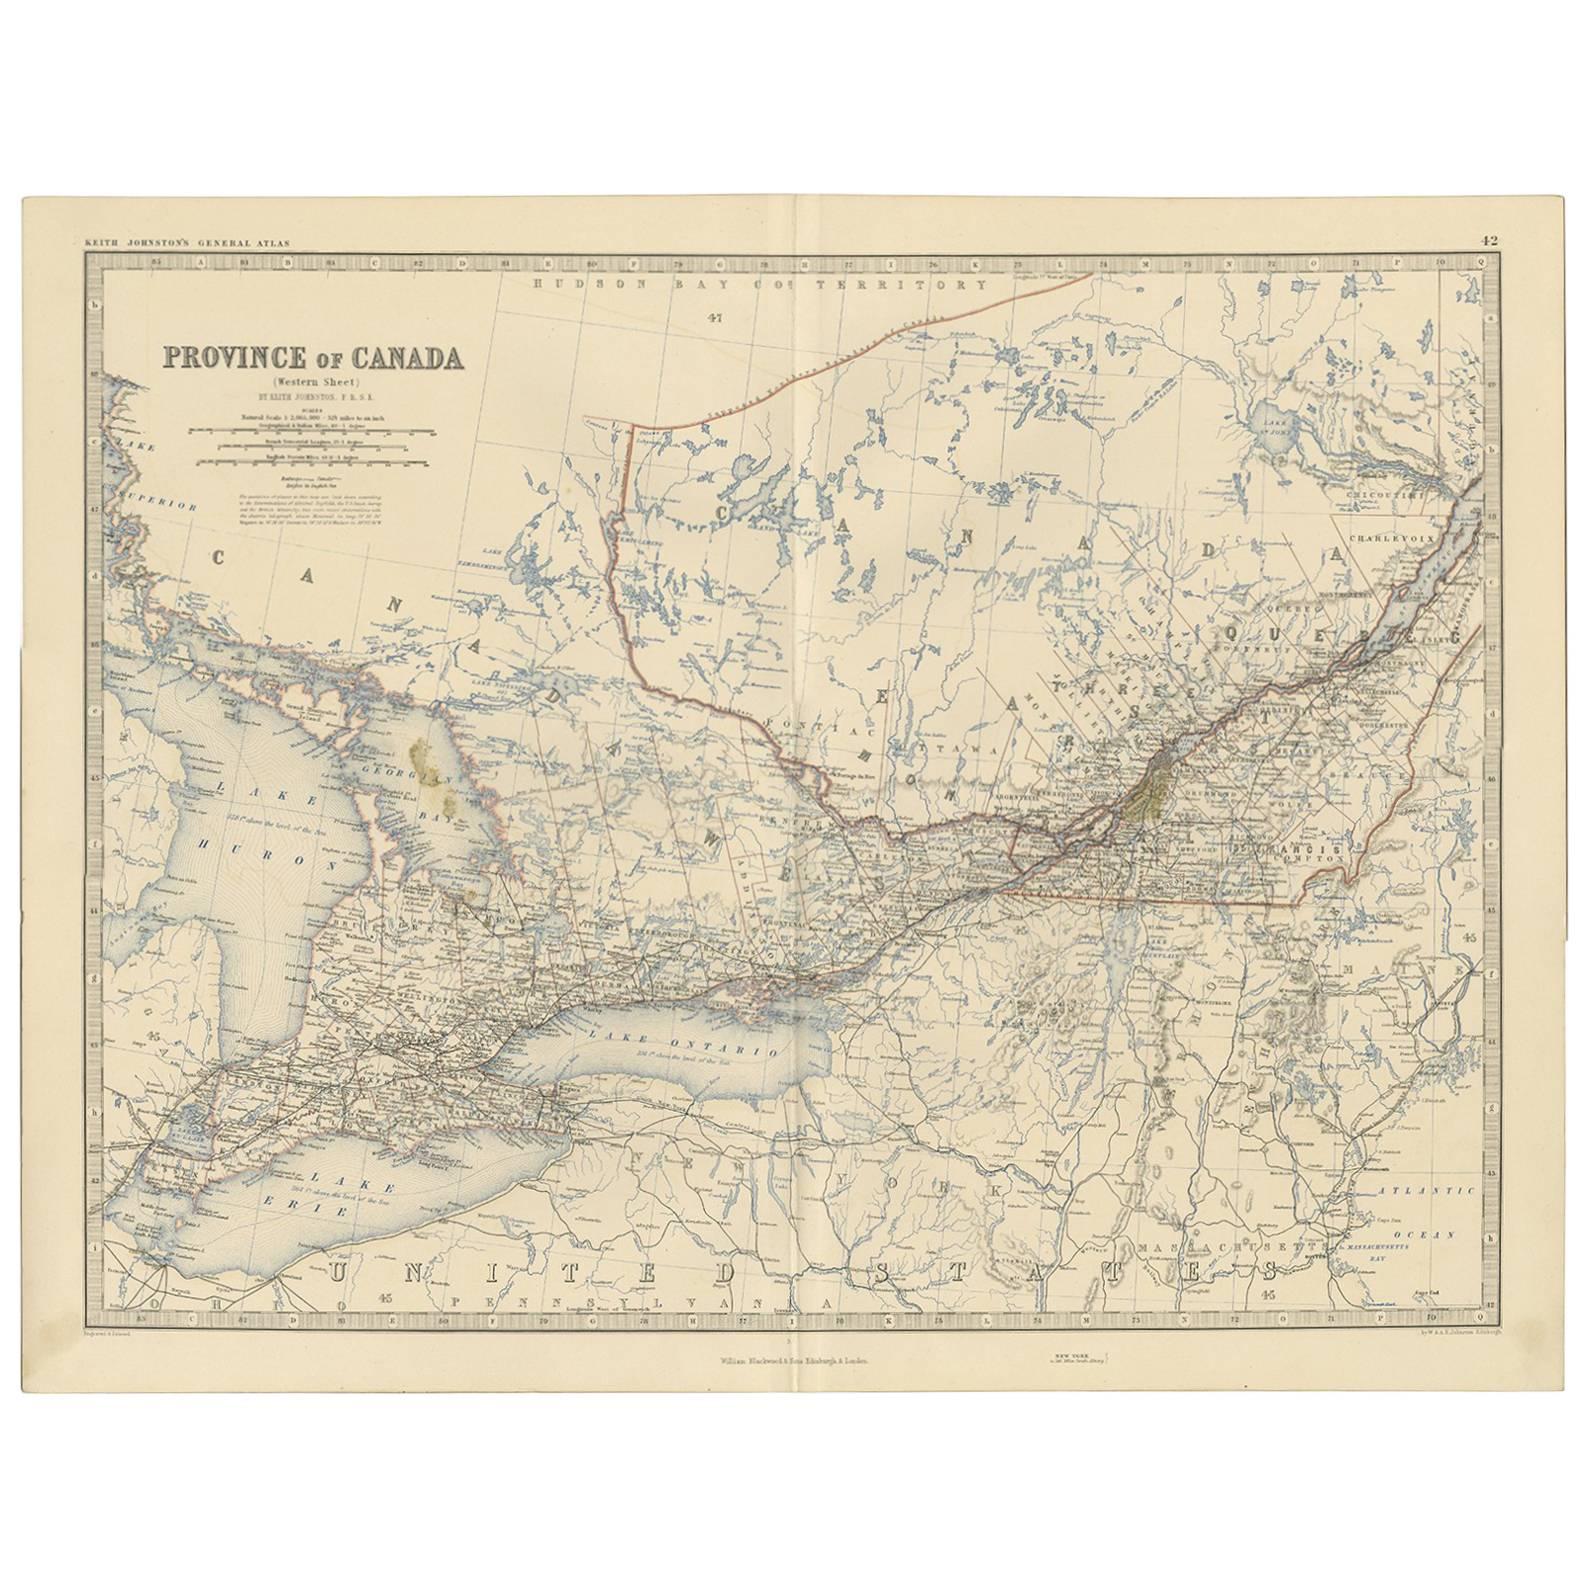 Antique Map of the Province of Canada ‘West’ by A.K. Johnston, 1865